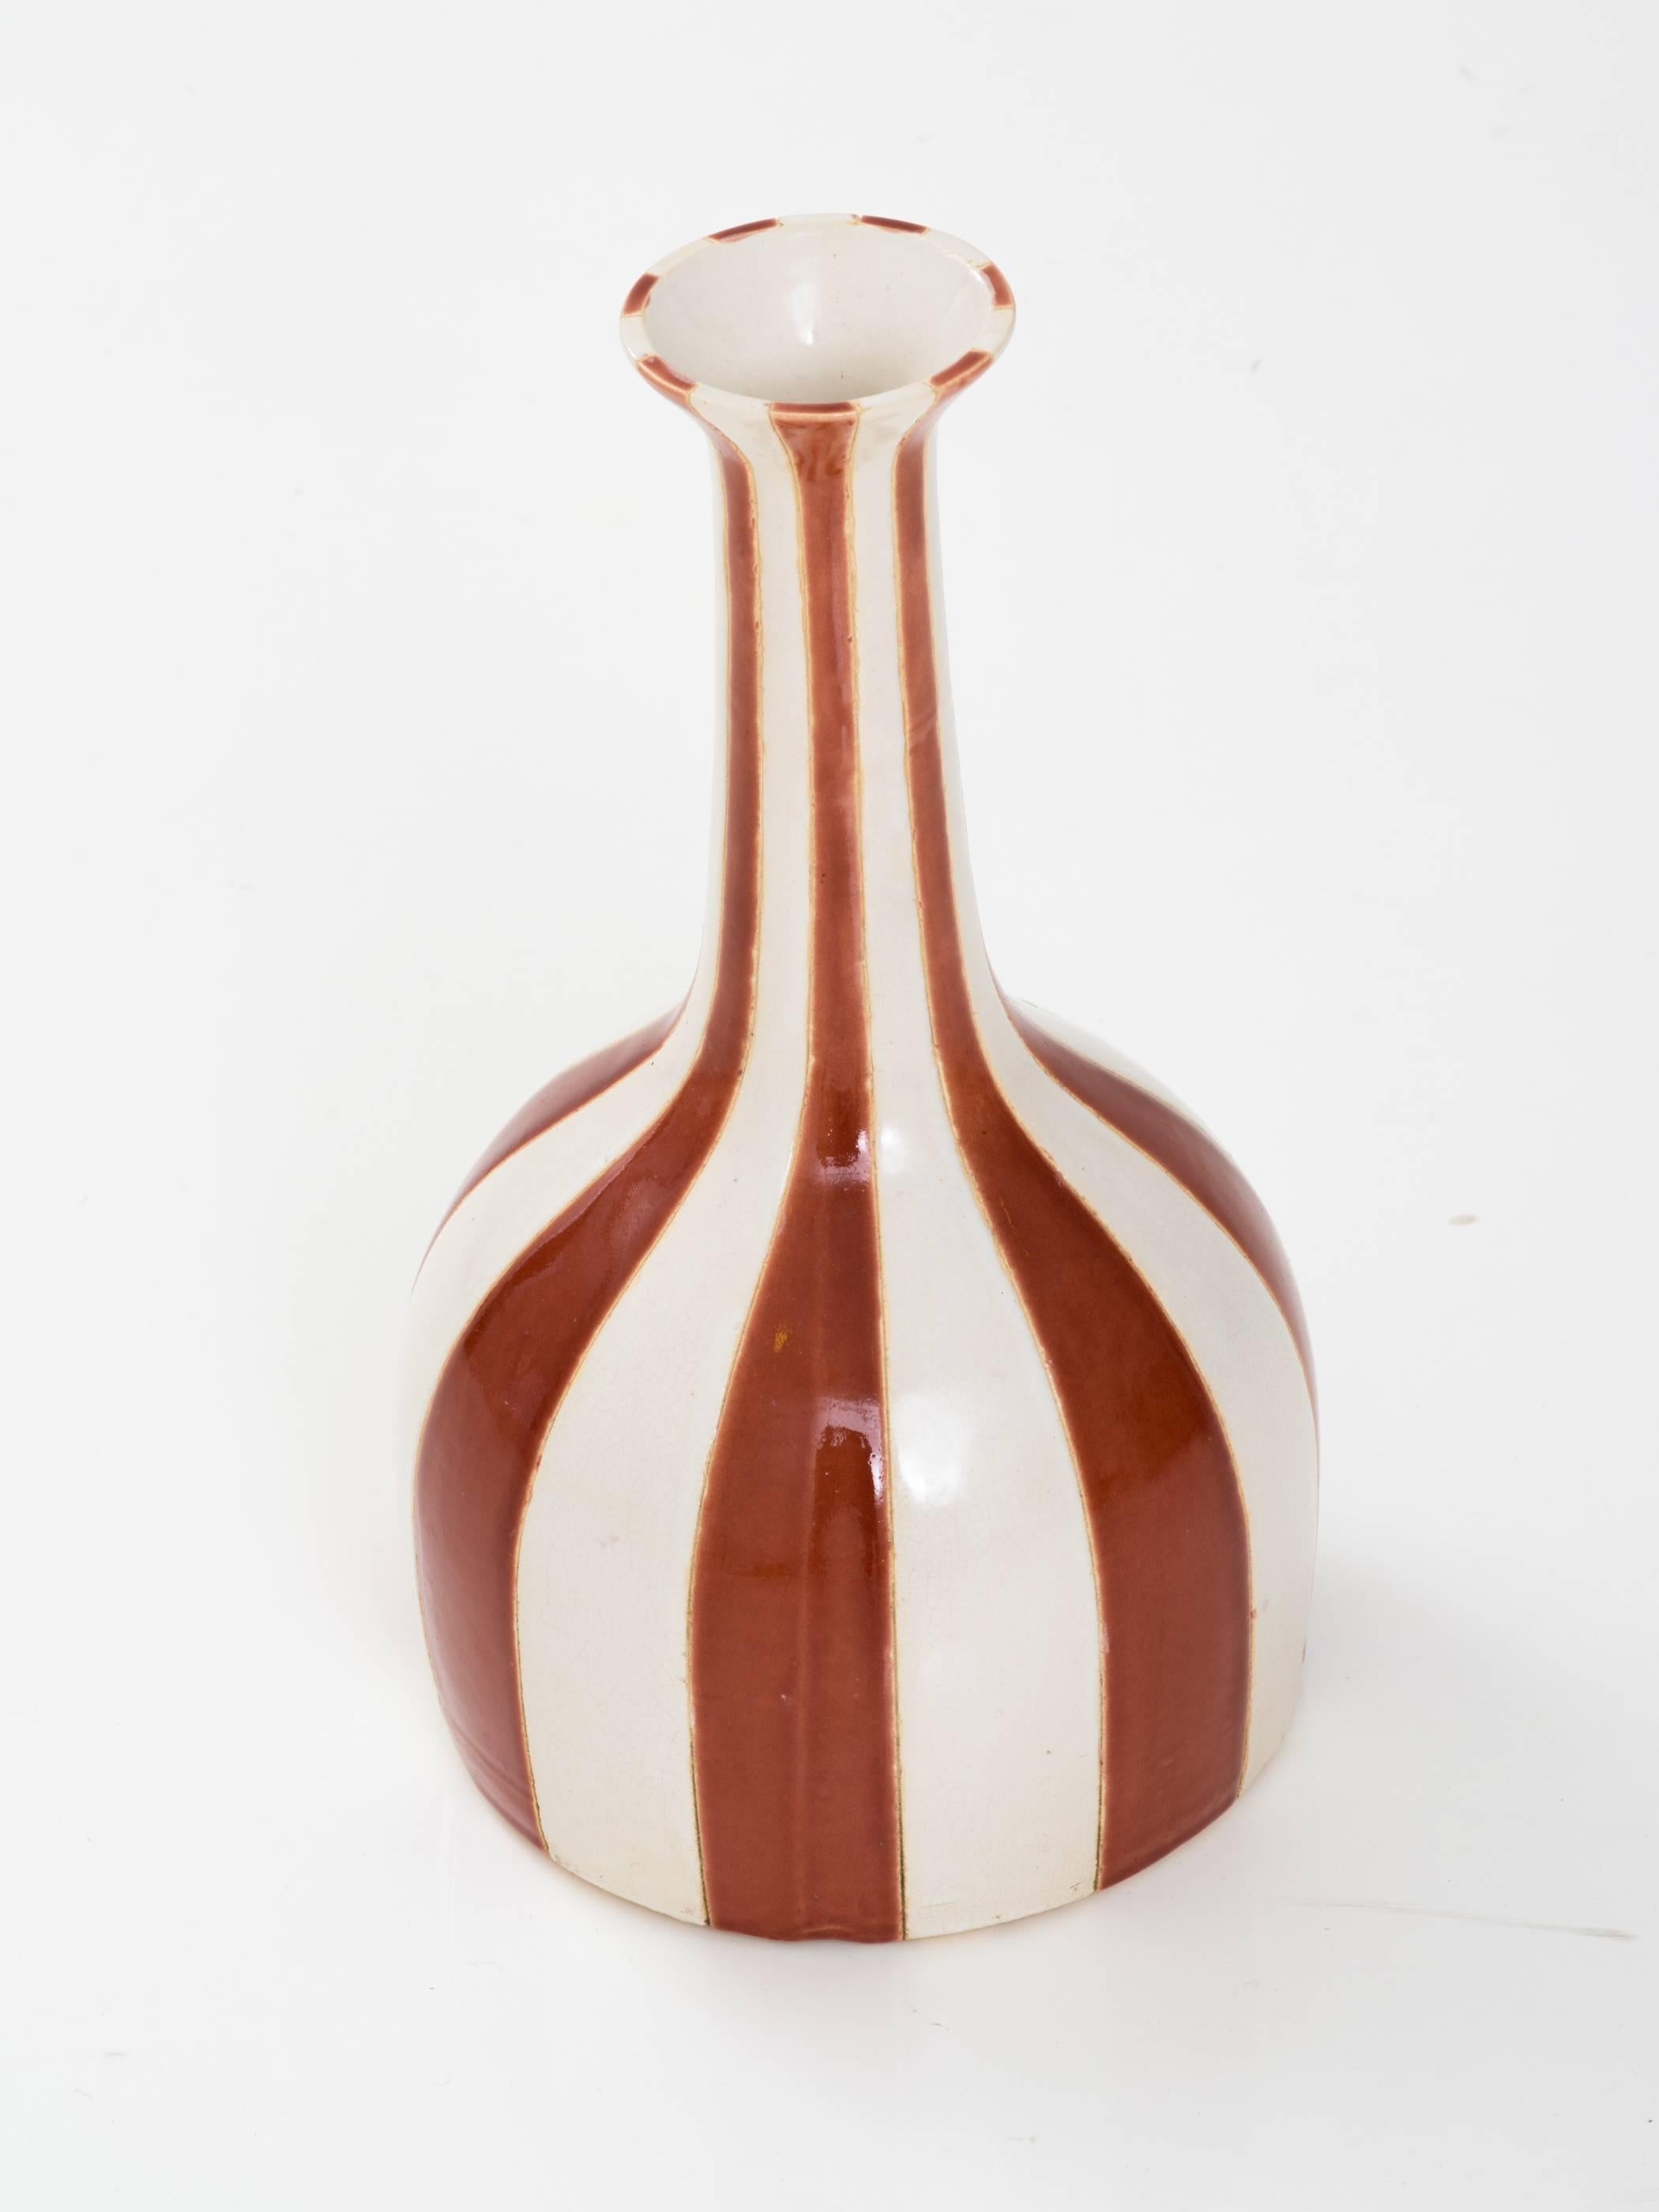 Interesting Italian Glazed Ceramic Vase In Excellent Condition For Sale In Montreal, QC